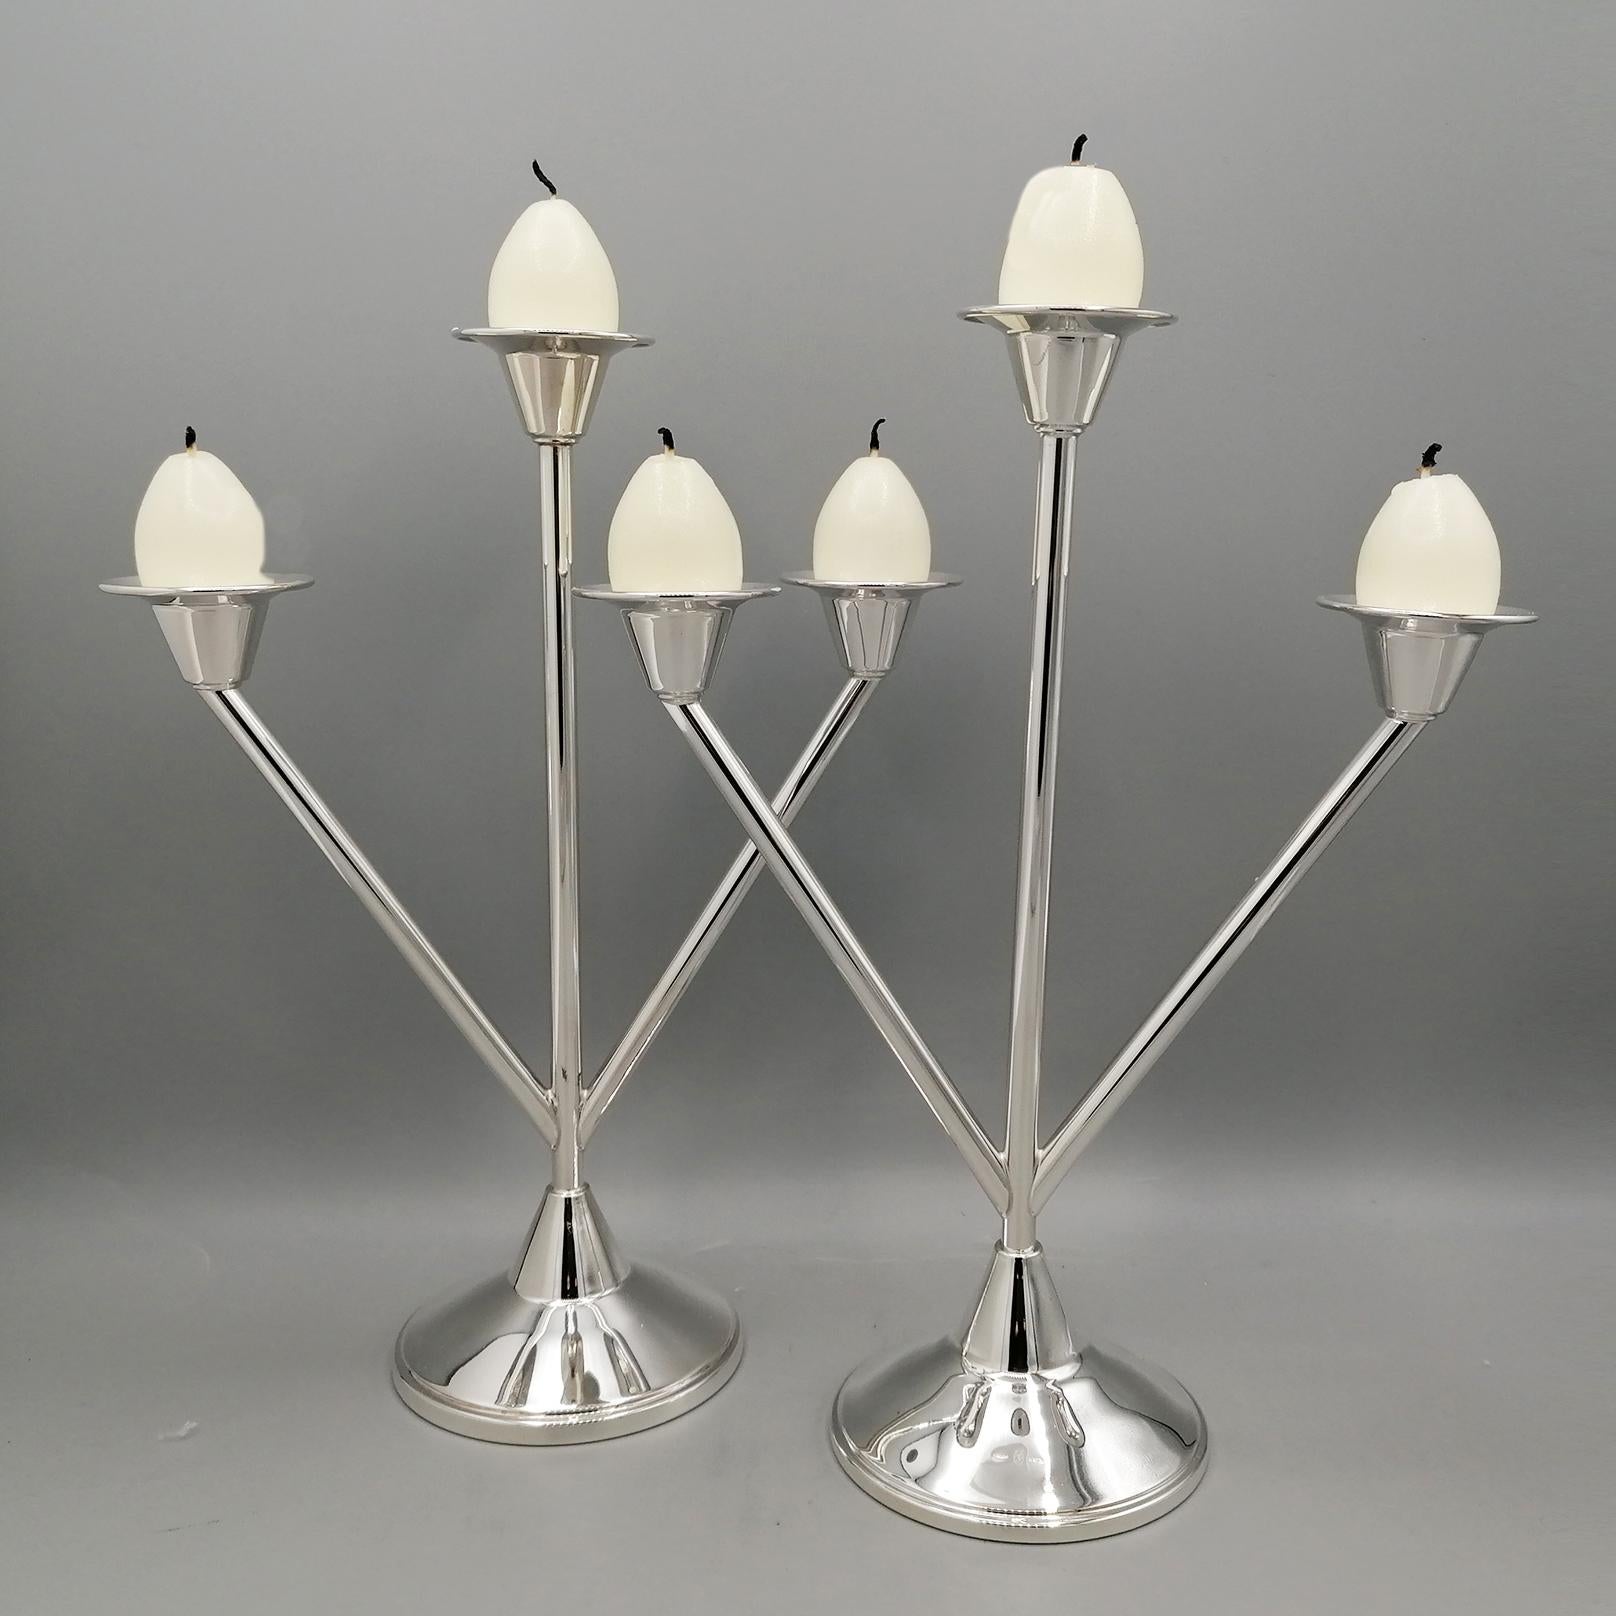 Pair of solid silver candlesticks in Art Deco style.
The base is round where 3 canulae have been welded which represent the candlestick branches.
The central cannula is larger than the other 2.
The wax collectors are round and smooth as are the